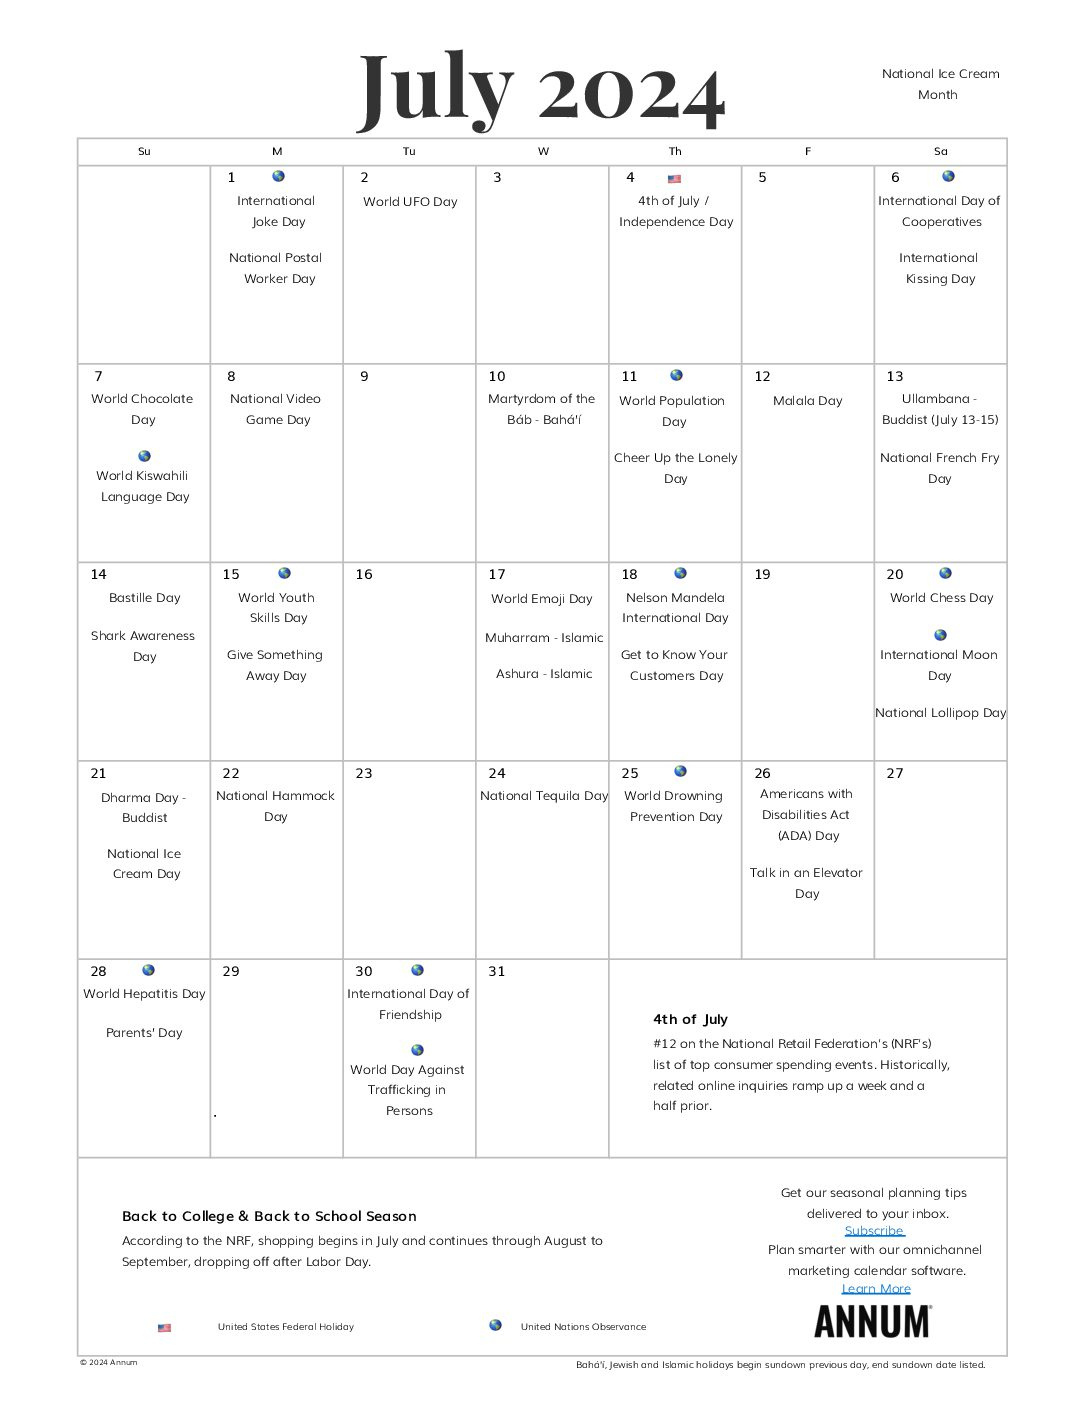 Printable July 2024 Calendar | July Holidays | Annum pertaining to July 2024 Calendar Events